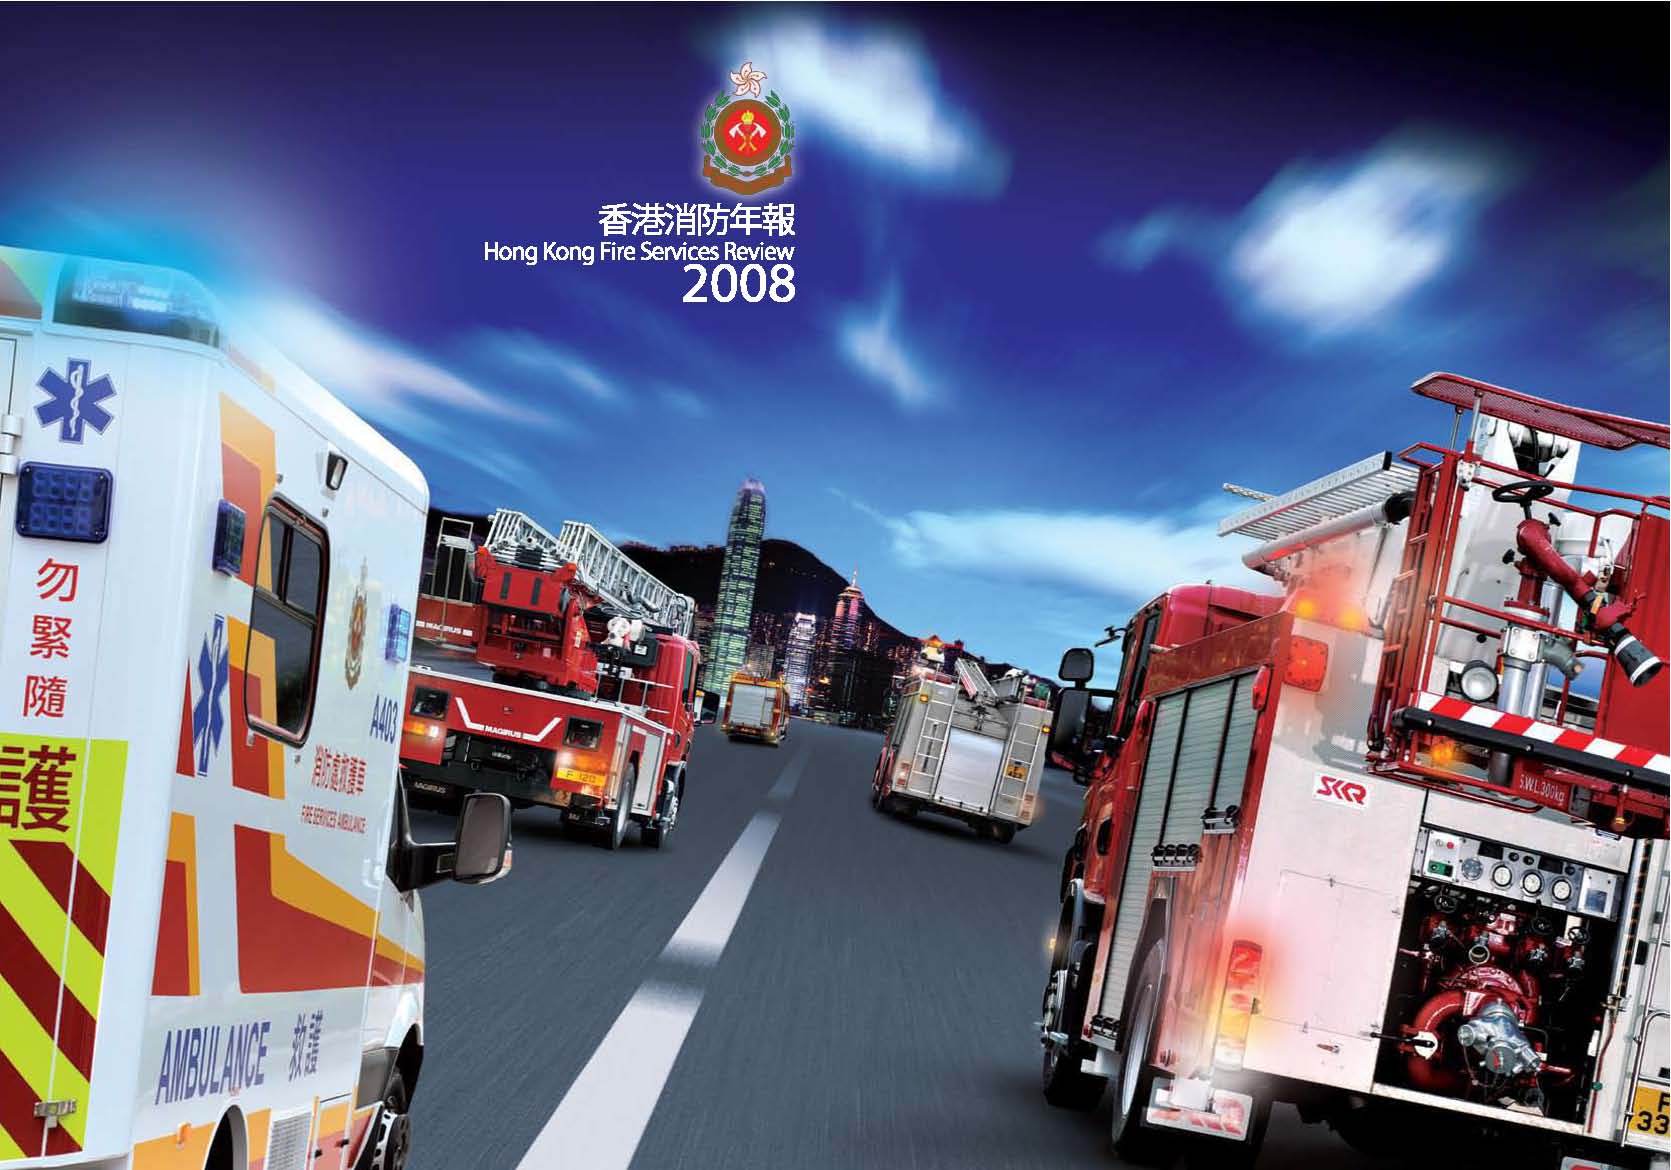 Hong Kong Fire Services Review 2008